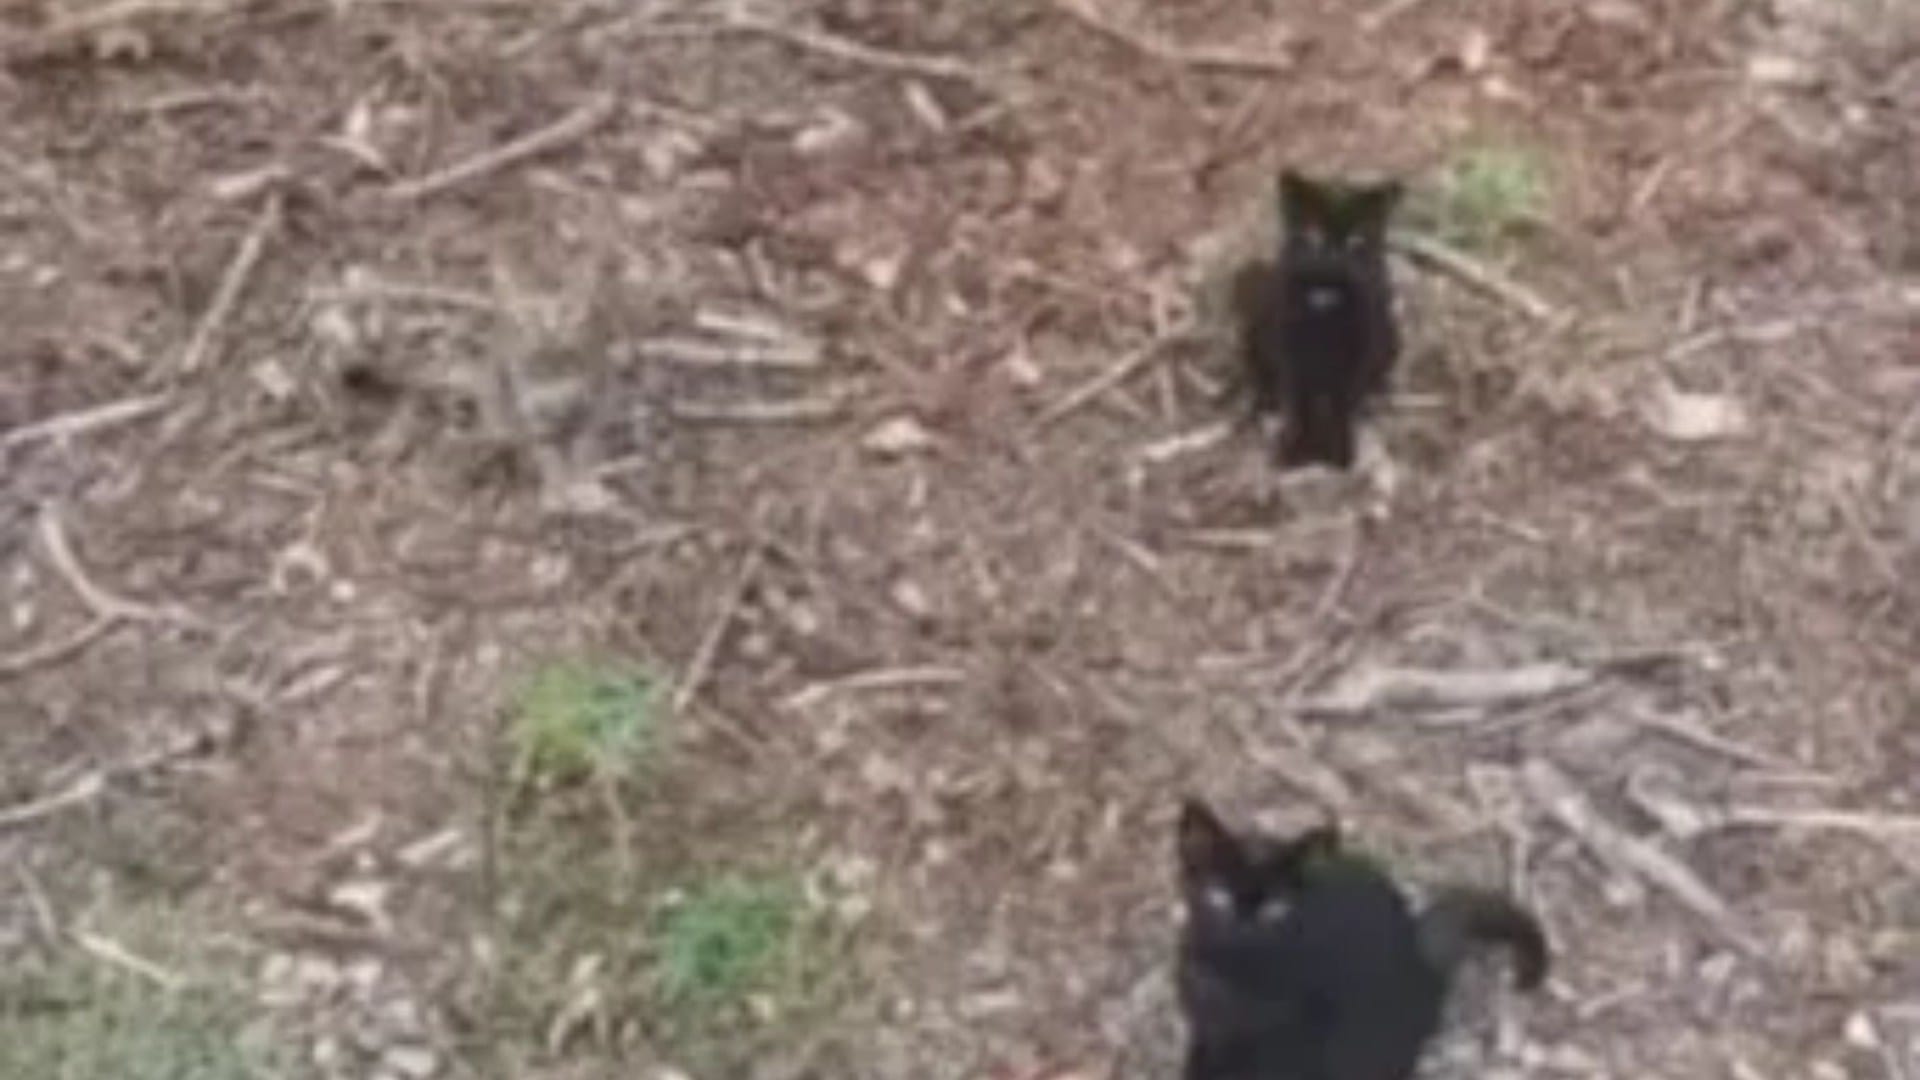 You have 20/20 vision if you can spot the fourth cat hiding in the woods in less than 8 seconds